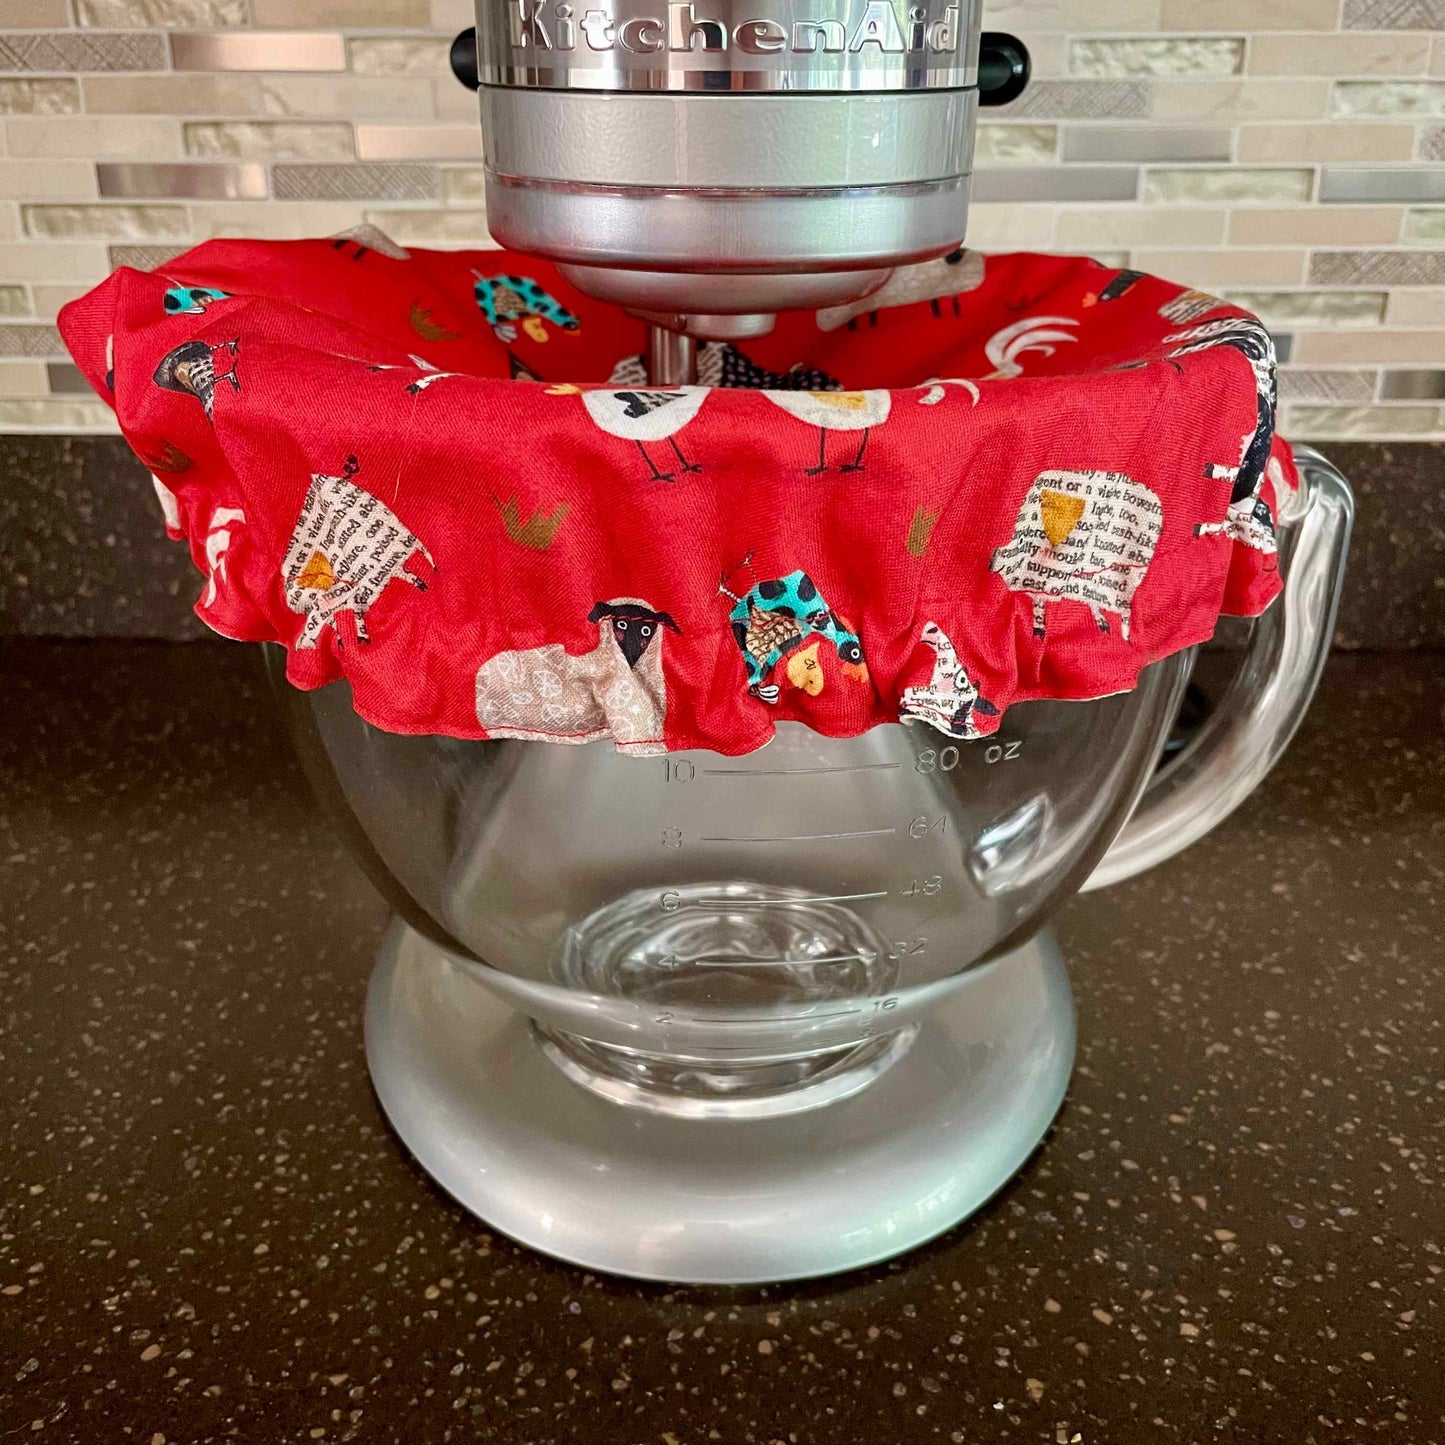 Stand Mixer Bowl Covers -  On The Farm Fabric Bowl Cover